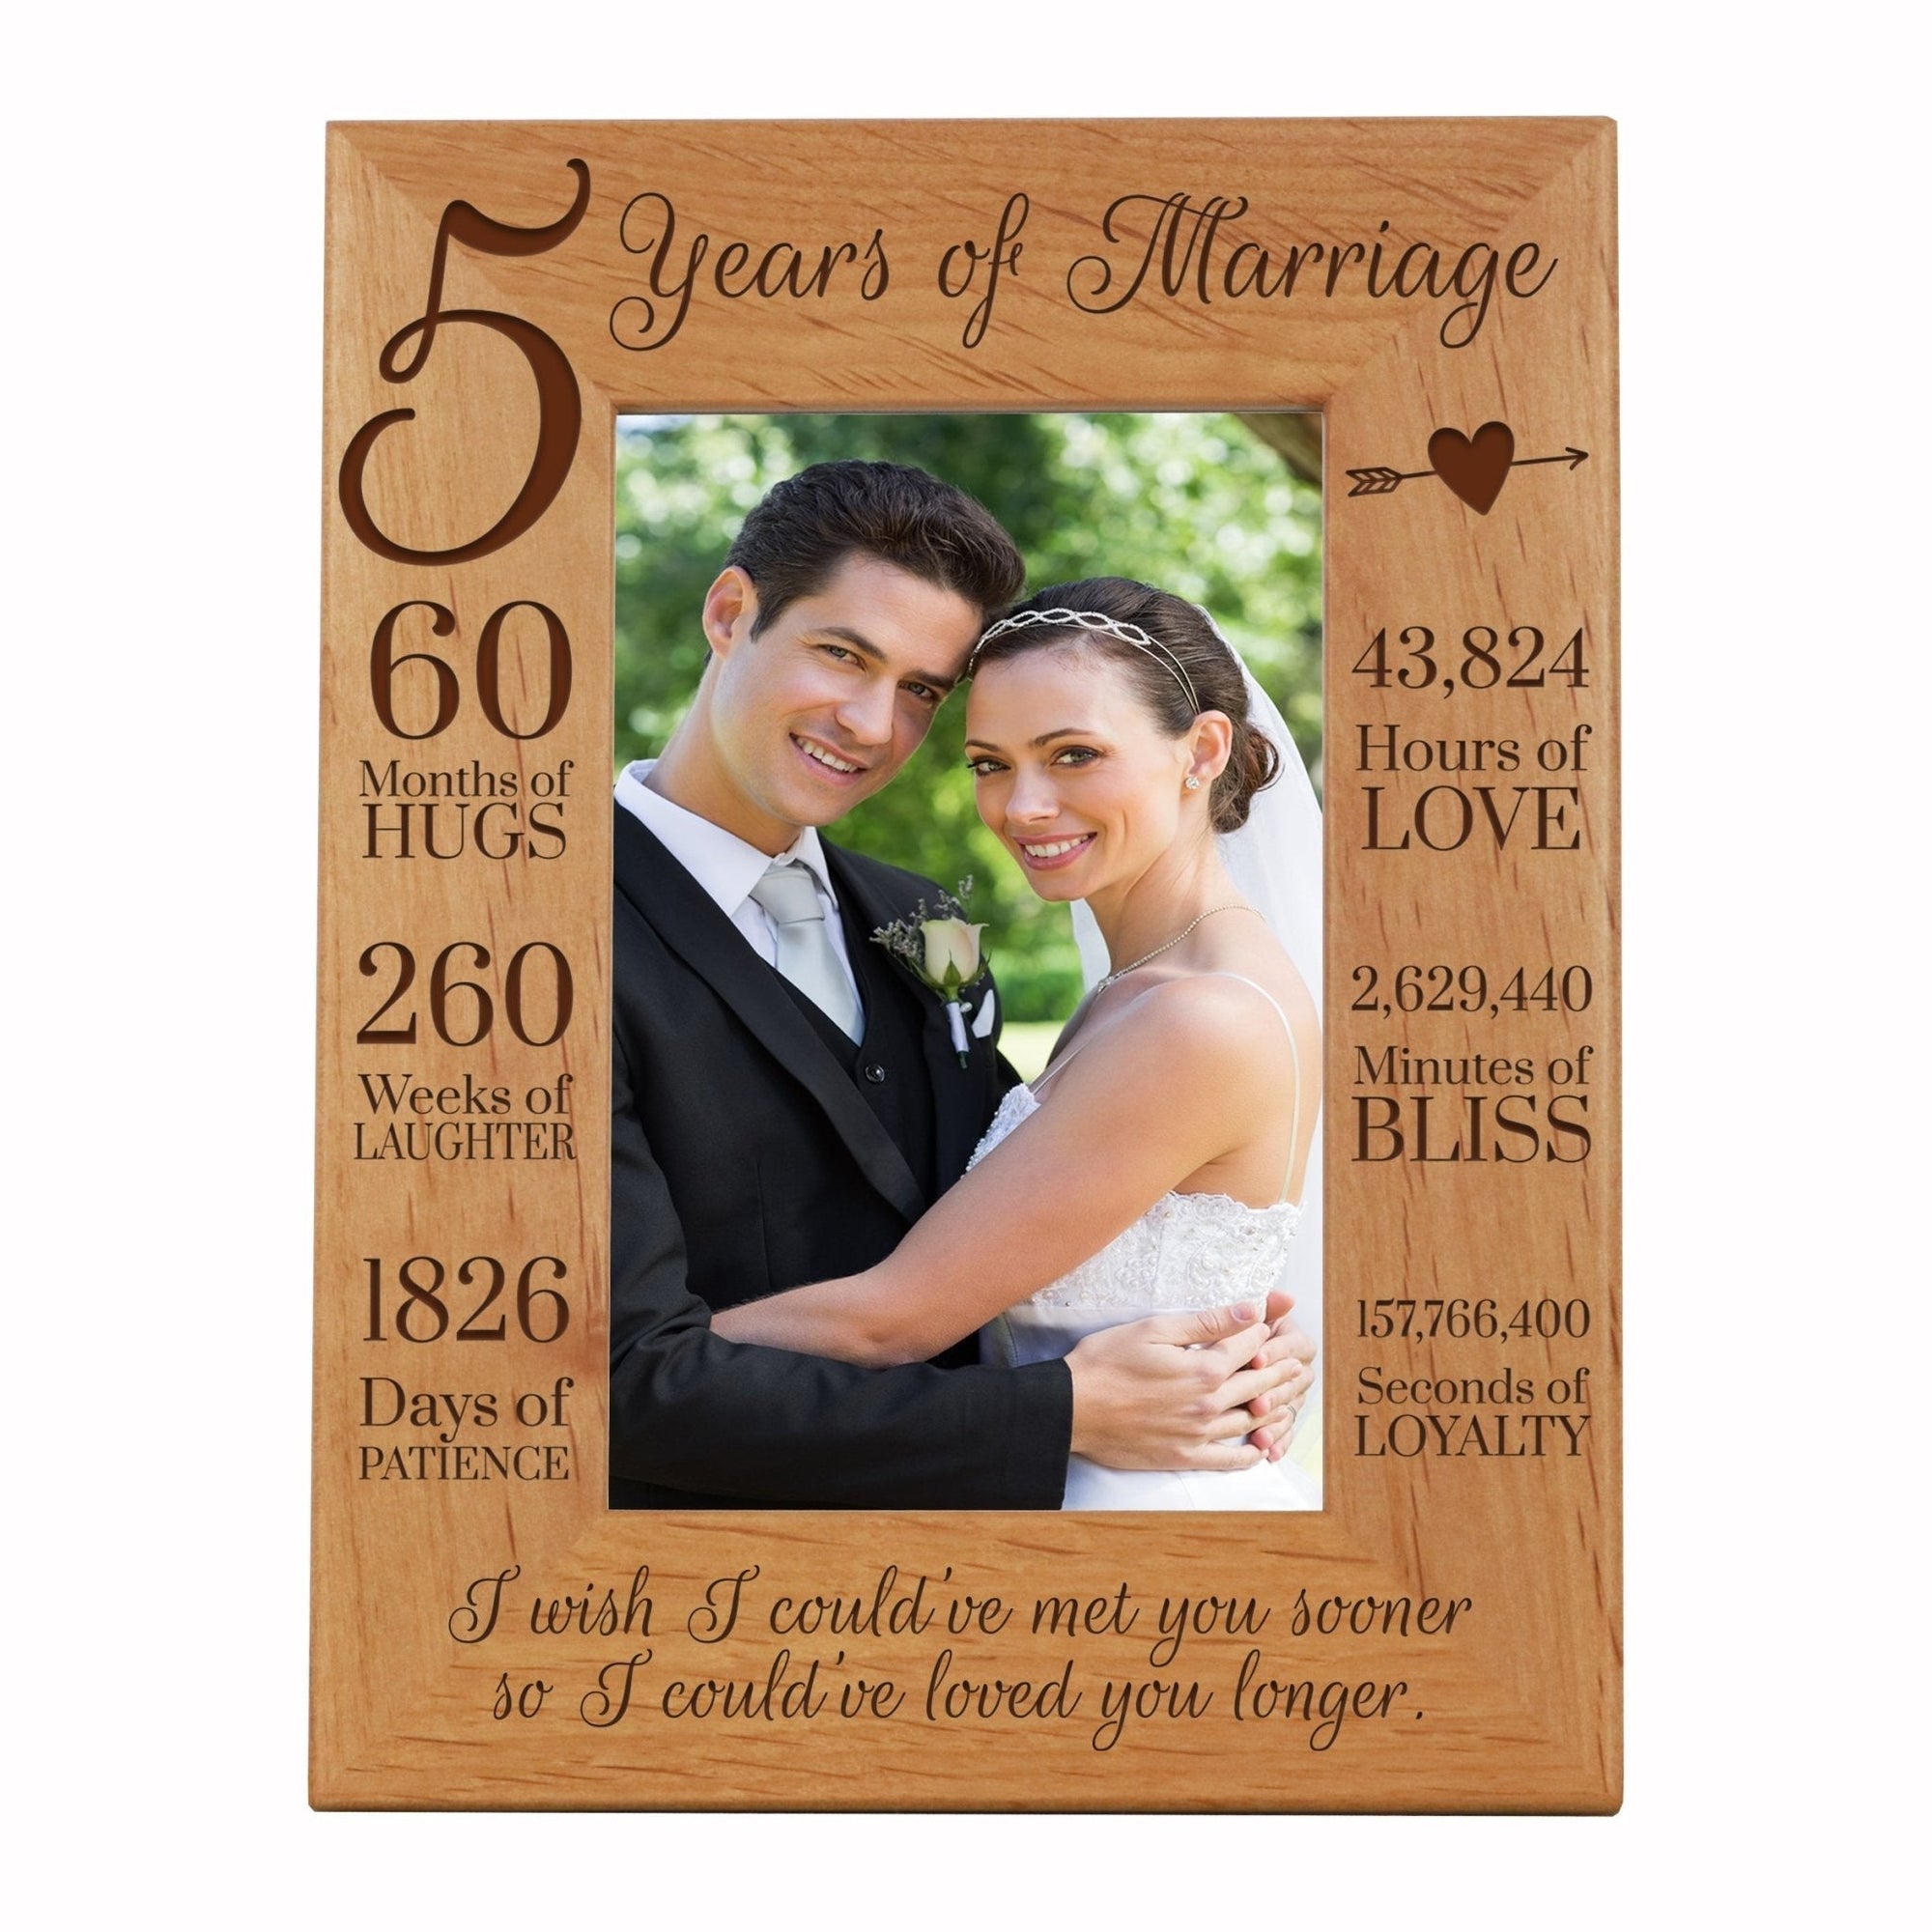 Engraved 5th Anniversary Picture Frame Gift for Couples - Met You Sooner - LifeSong Milestones